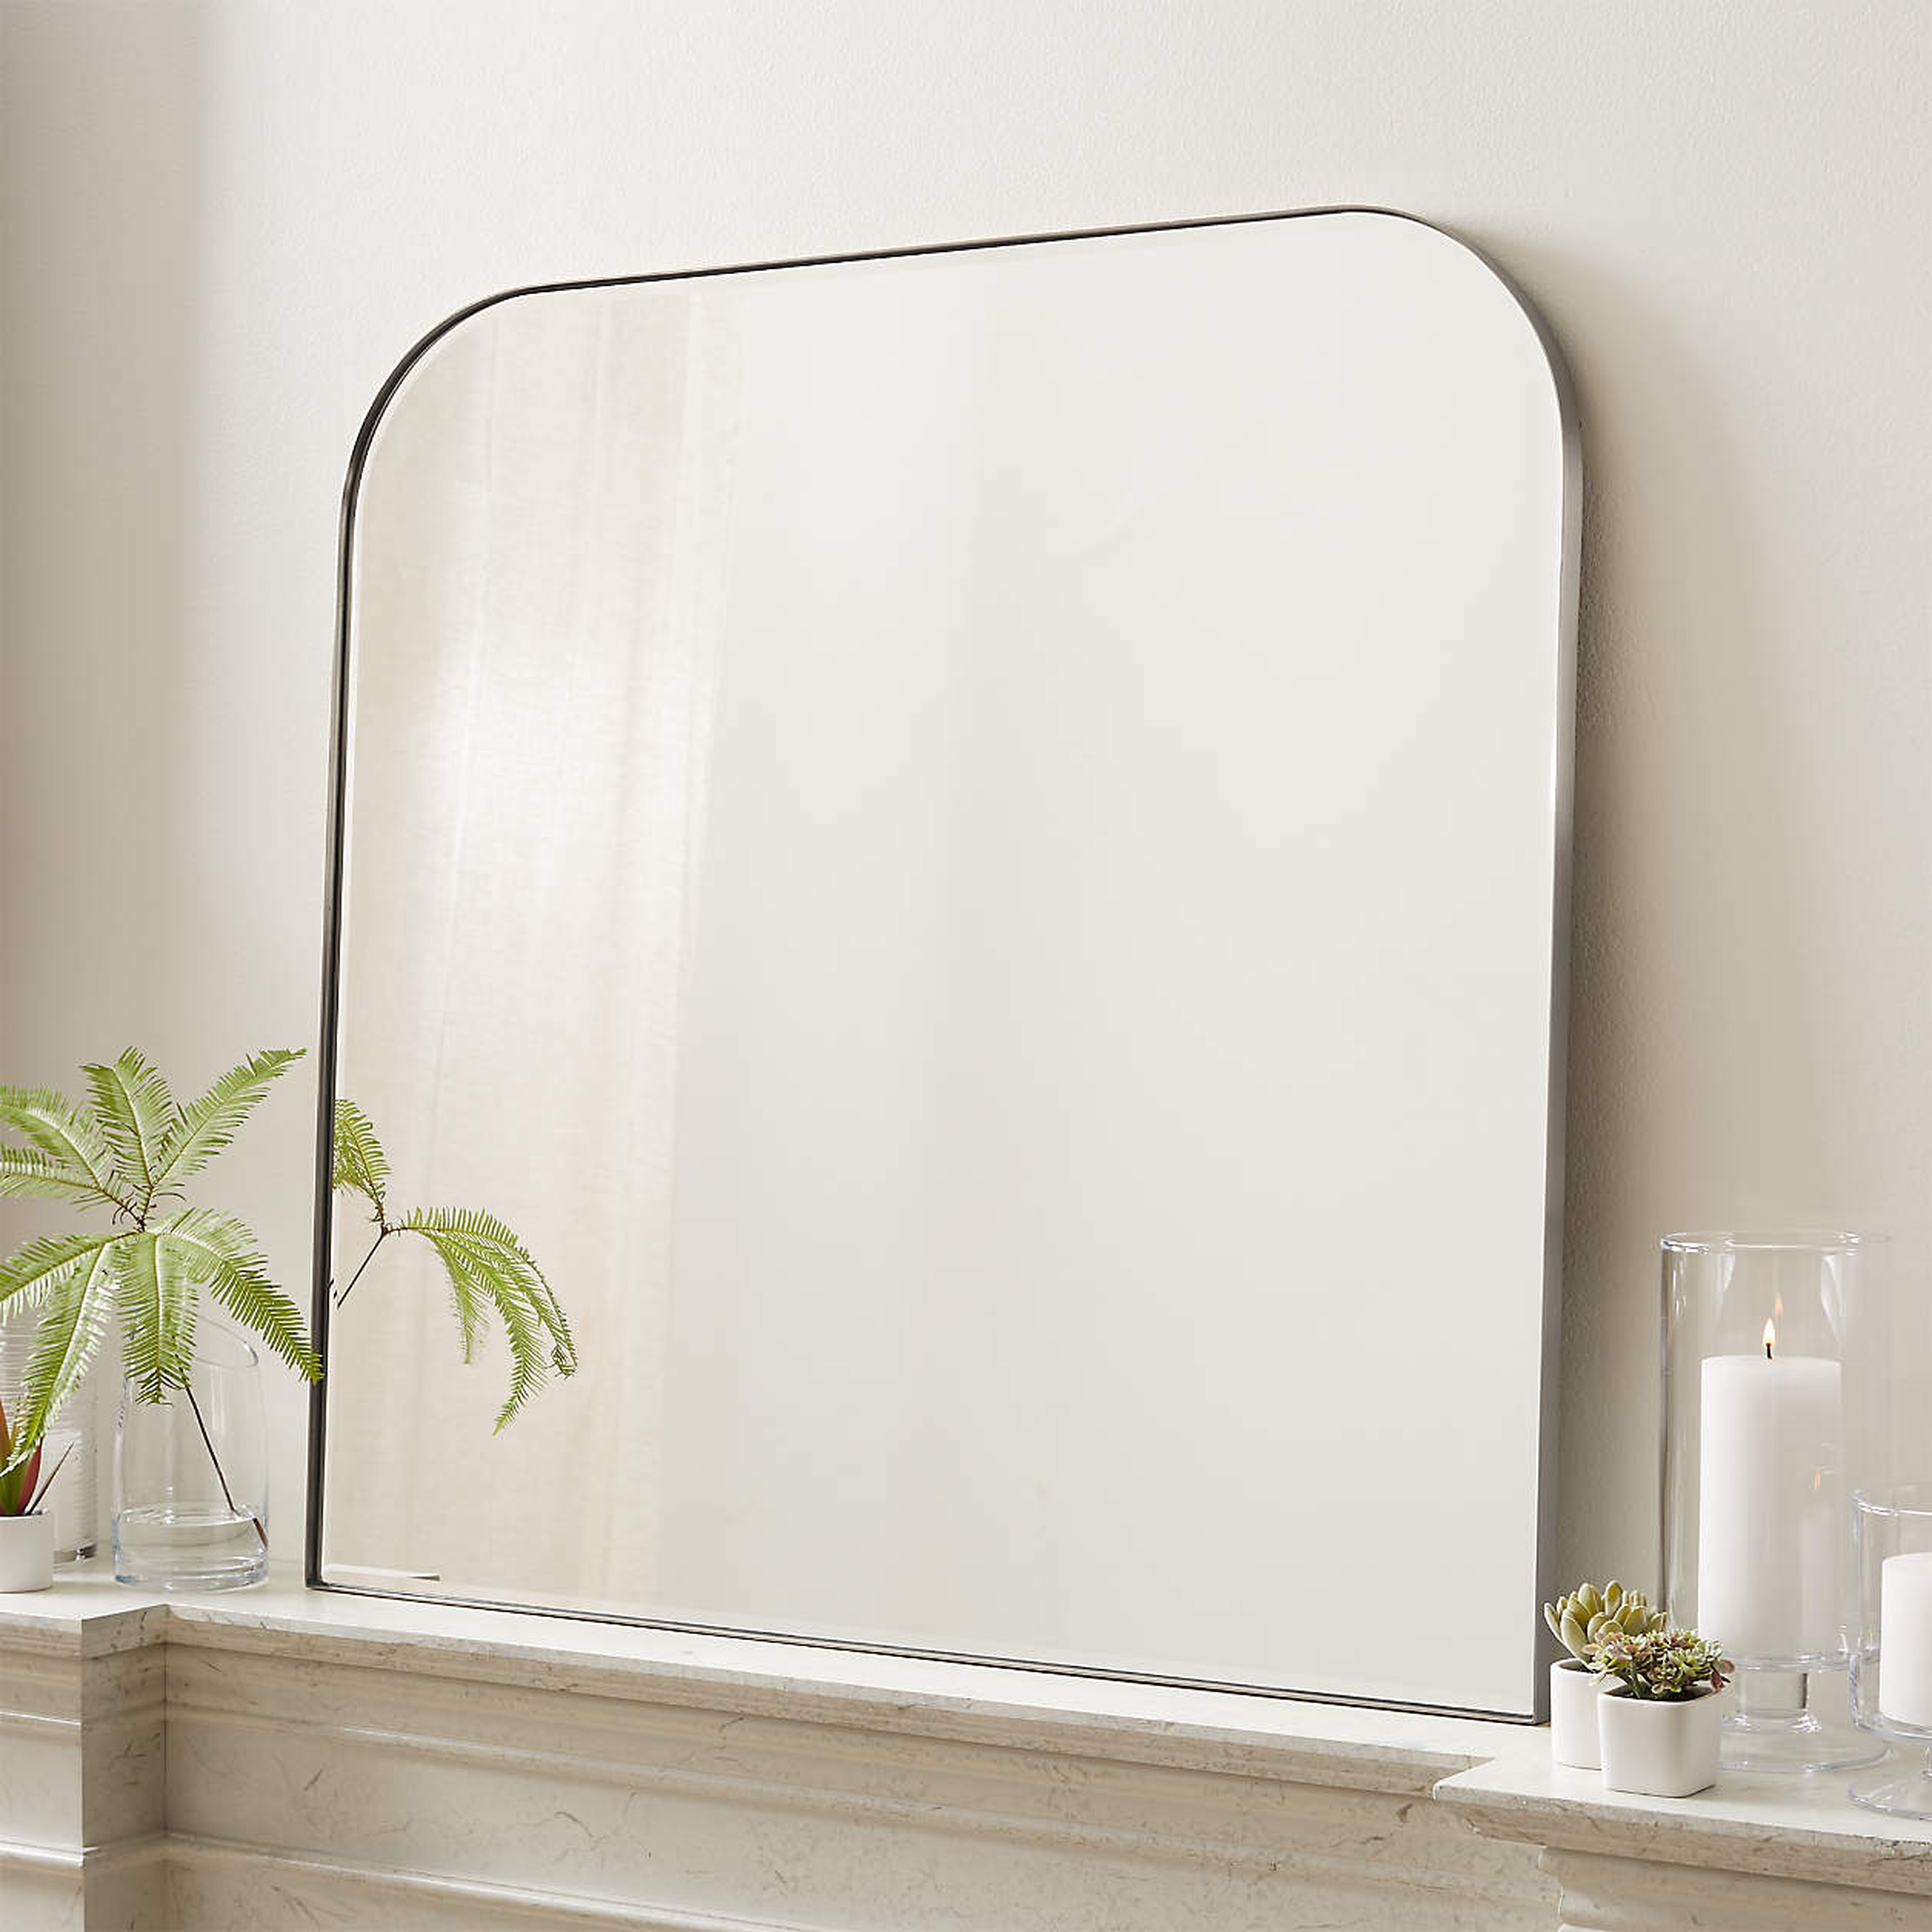 Edge Black Arch Wall Mirror - Crate and Barrel